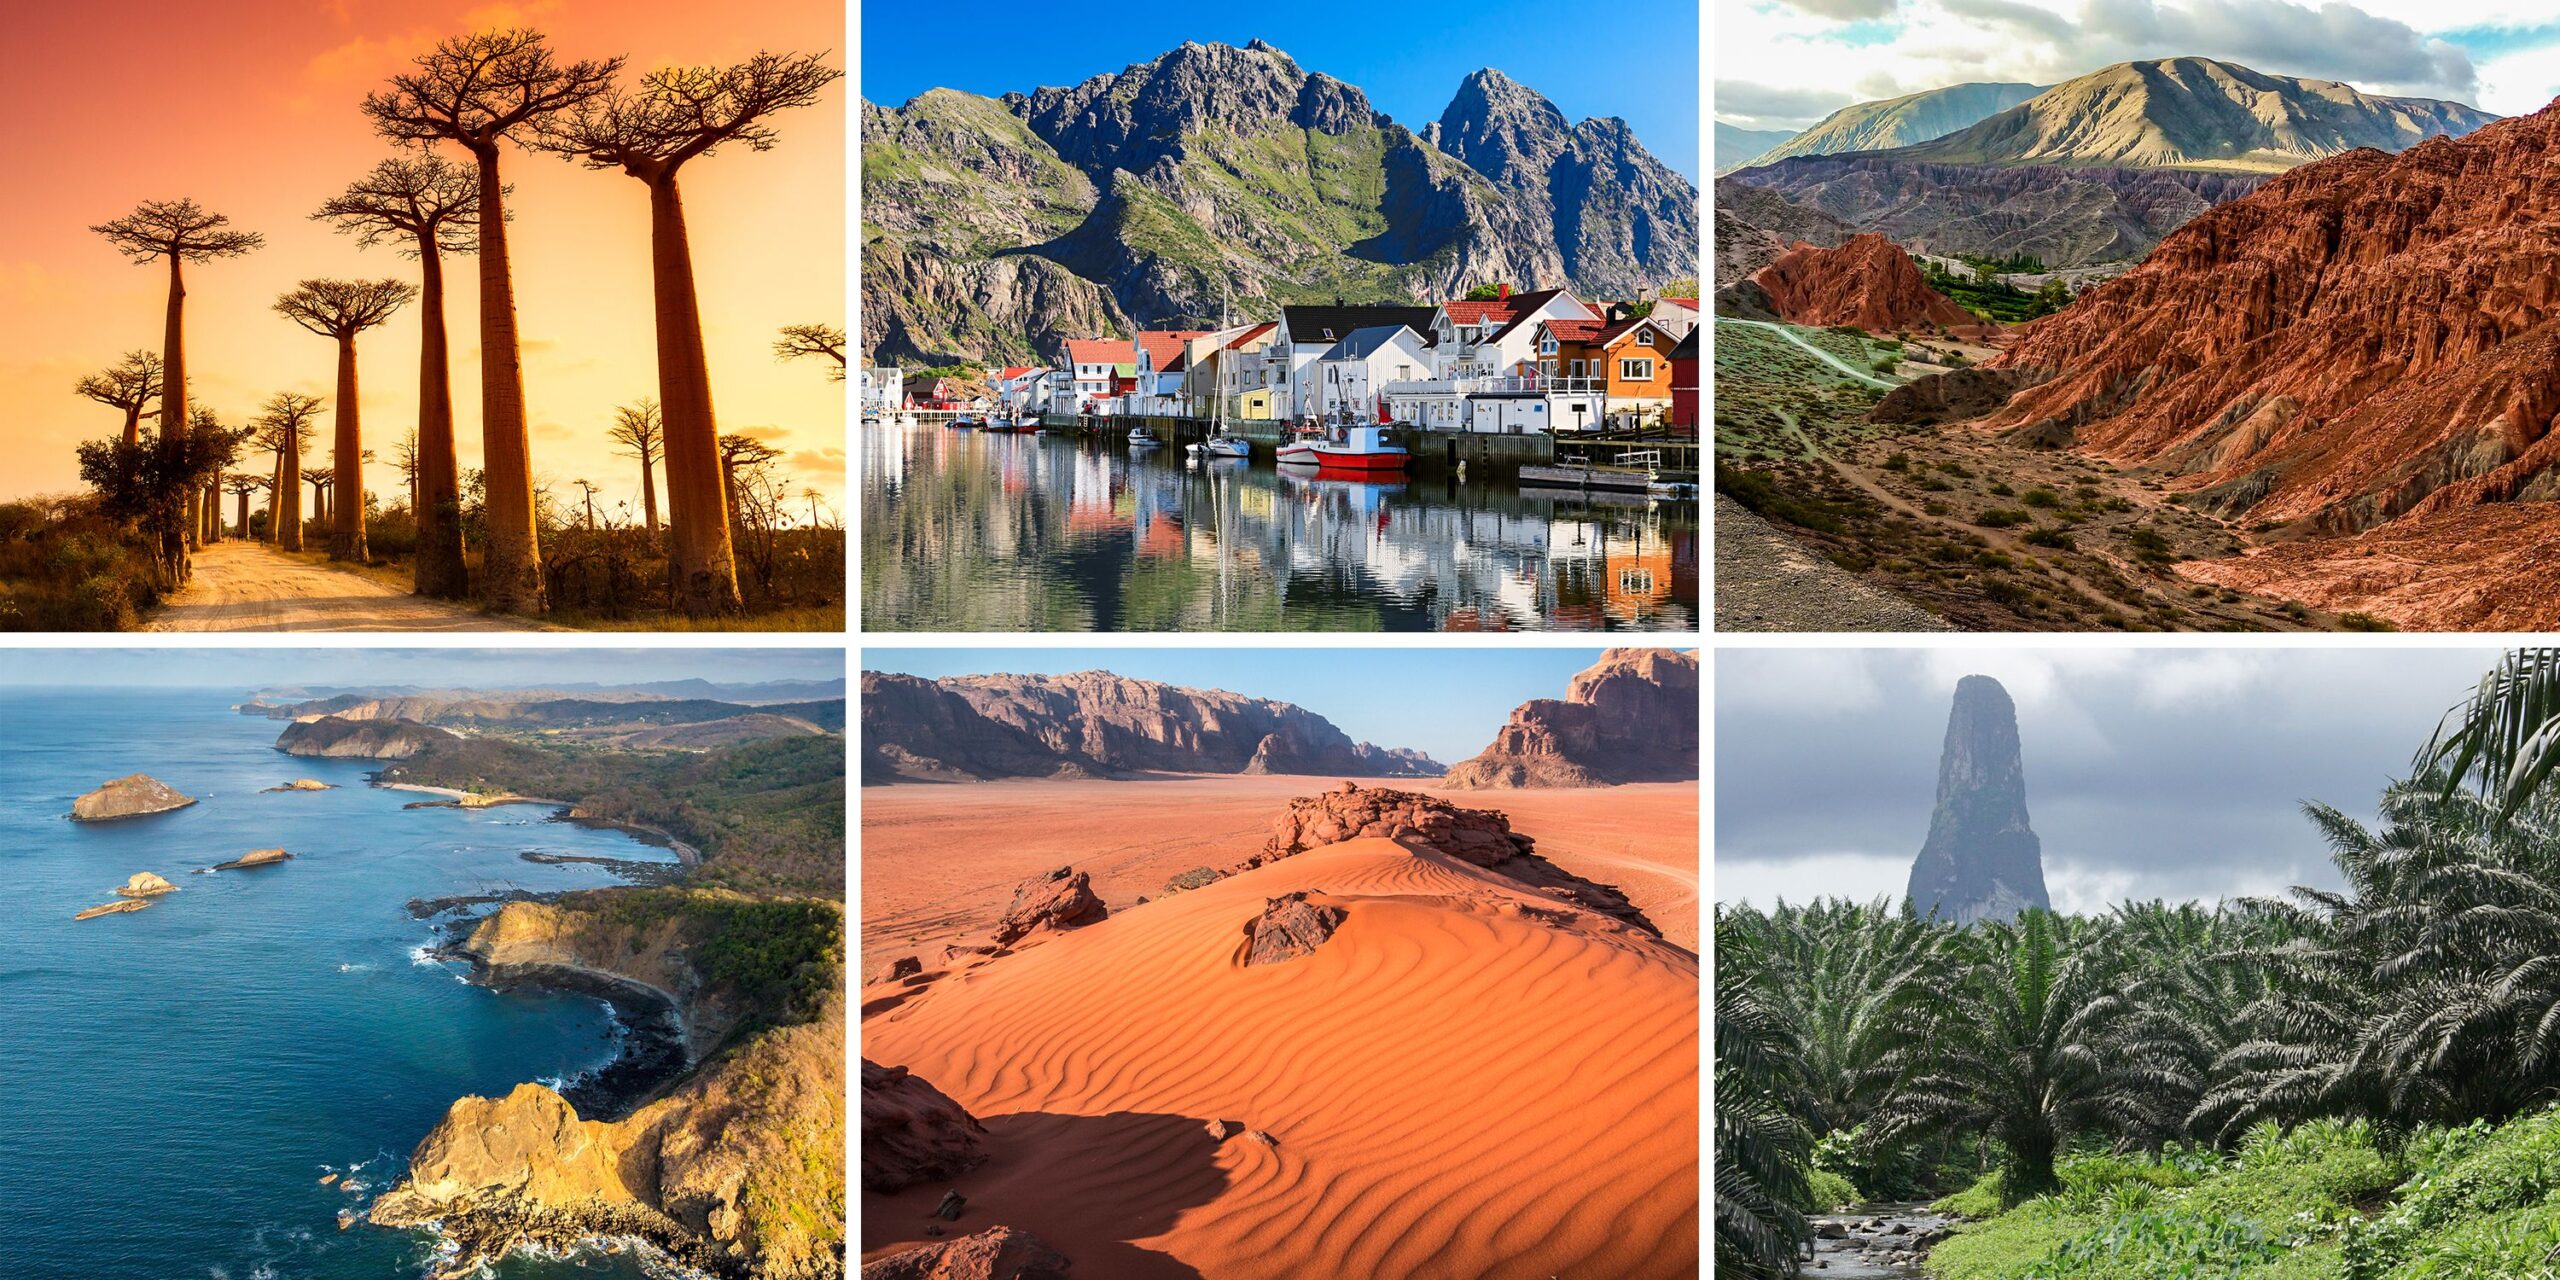 Top Travel Destinations Around The World To Explore New Cultures